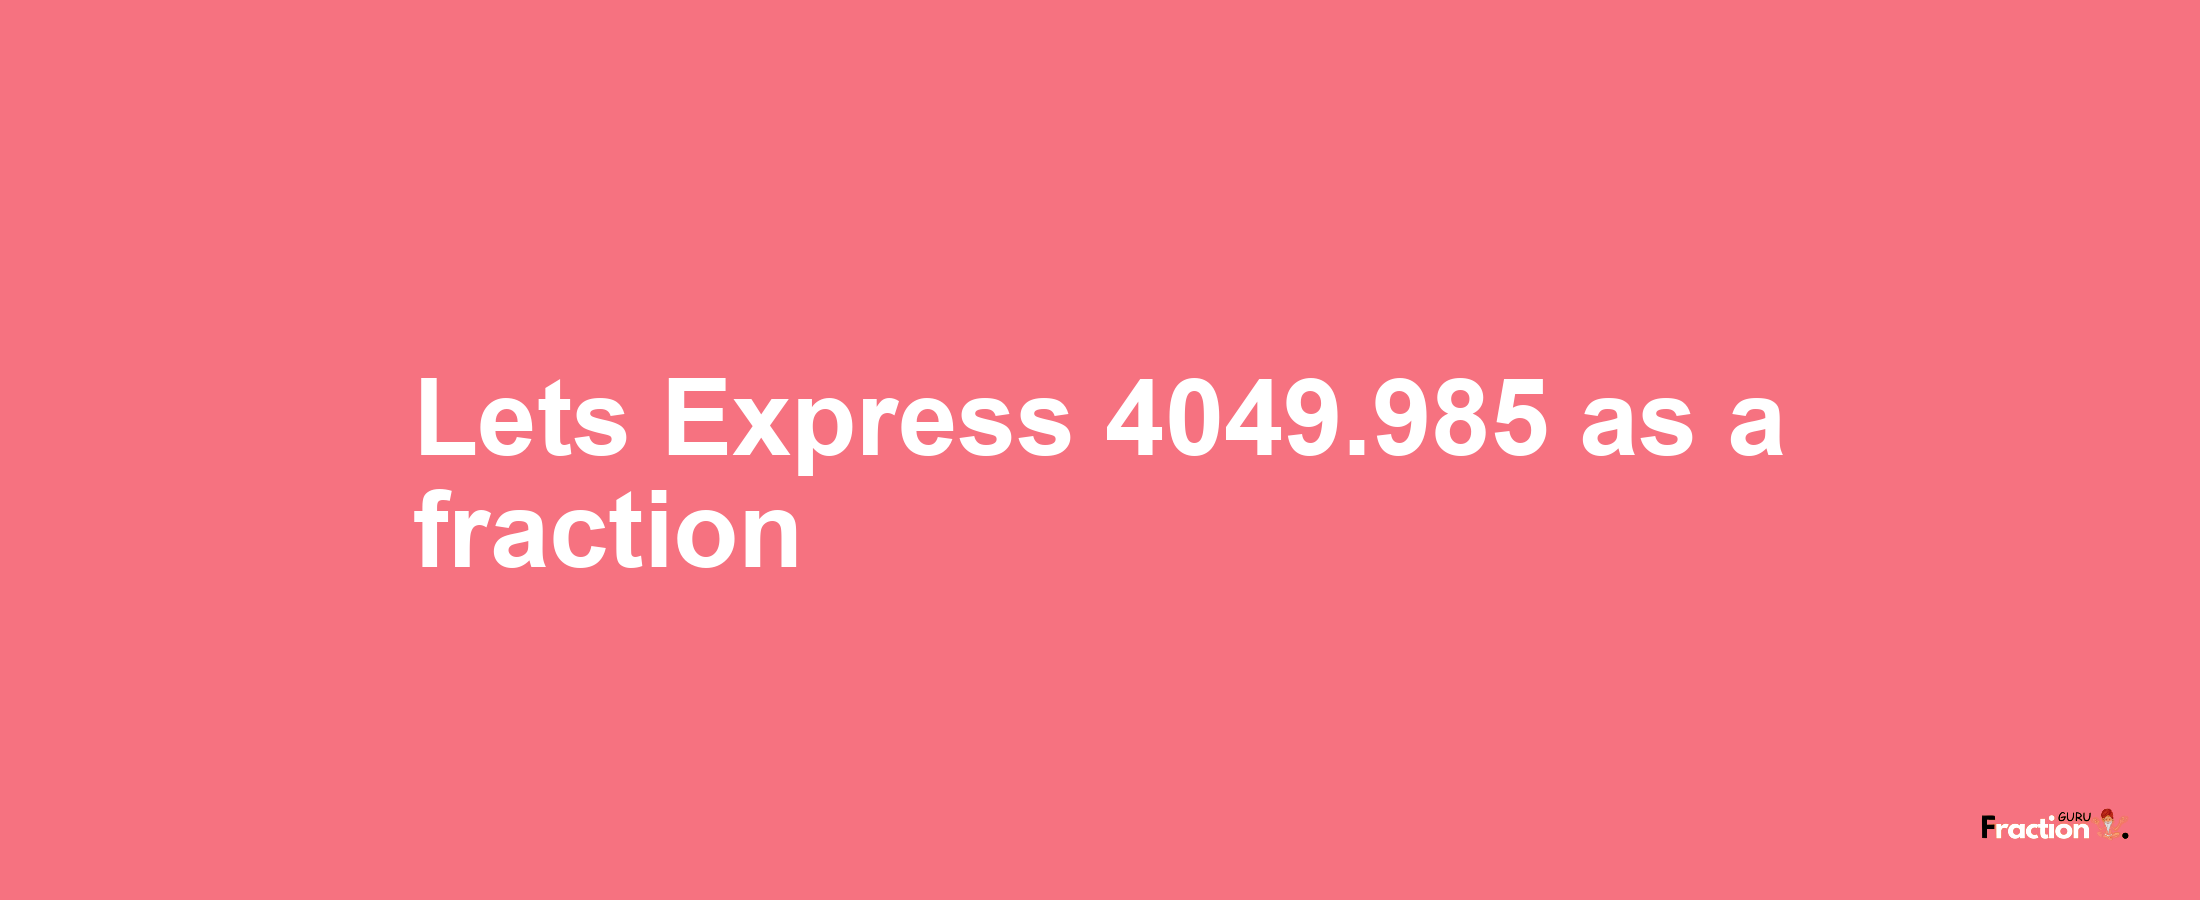 Lets Express 4049.985 as afraction